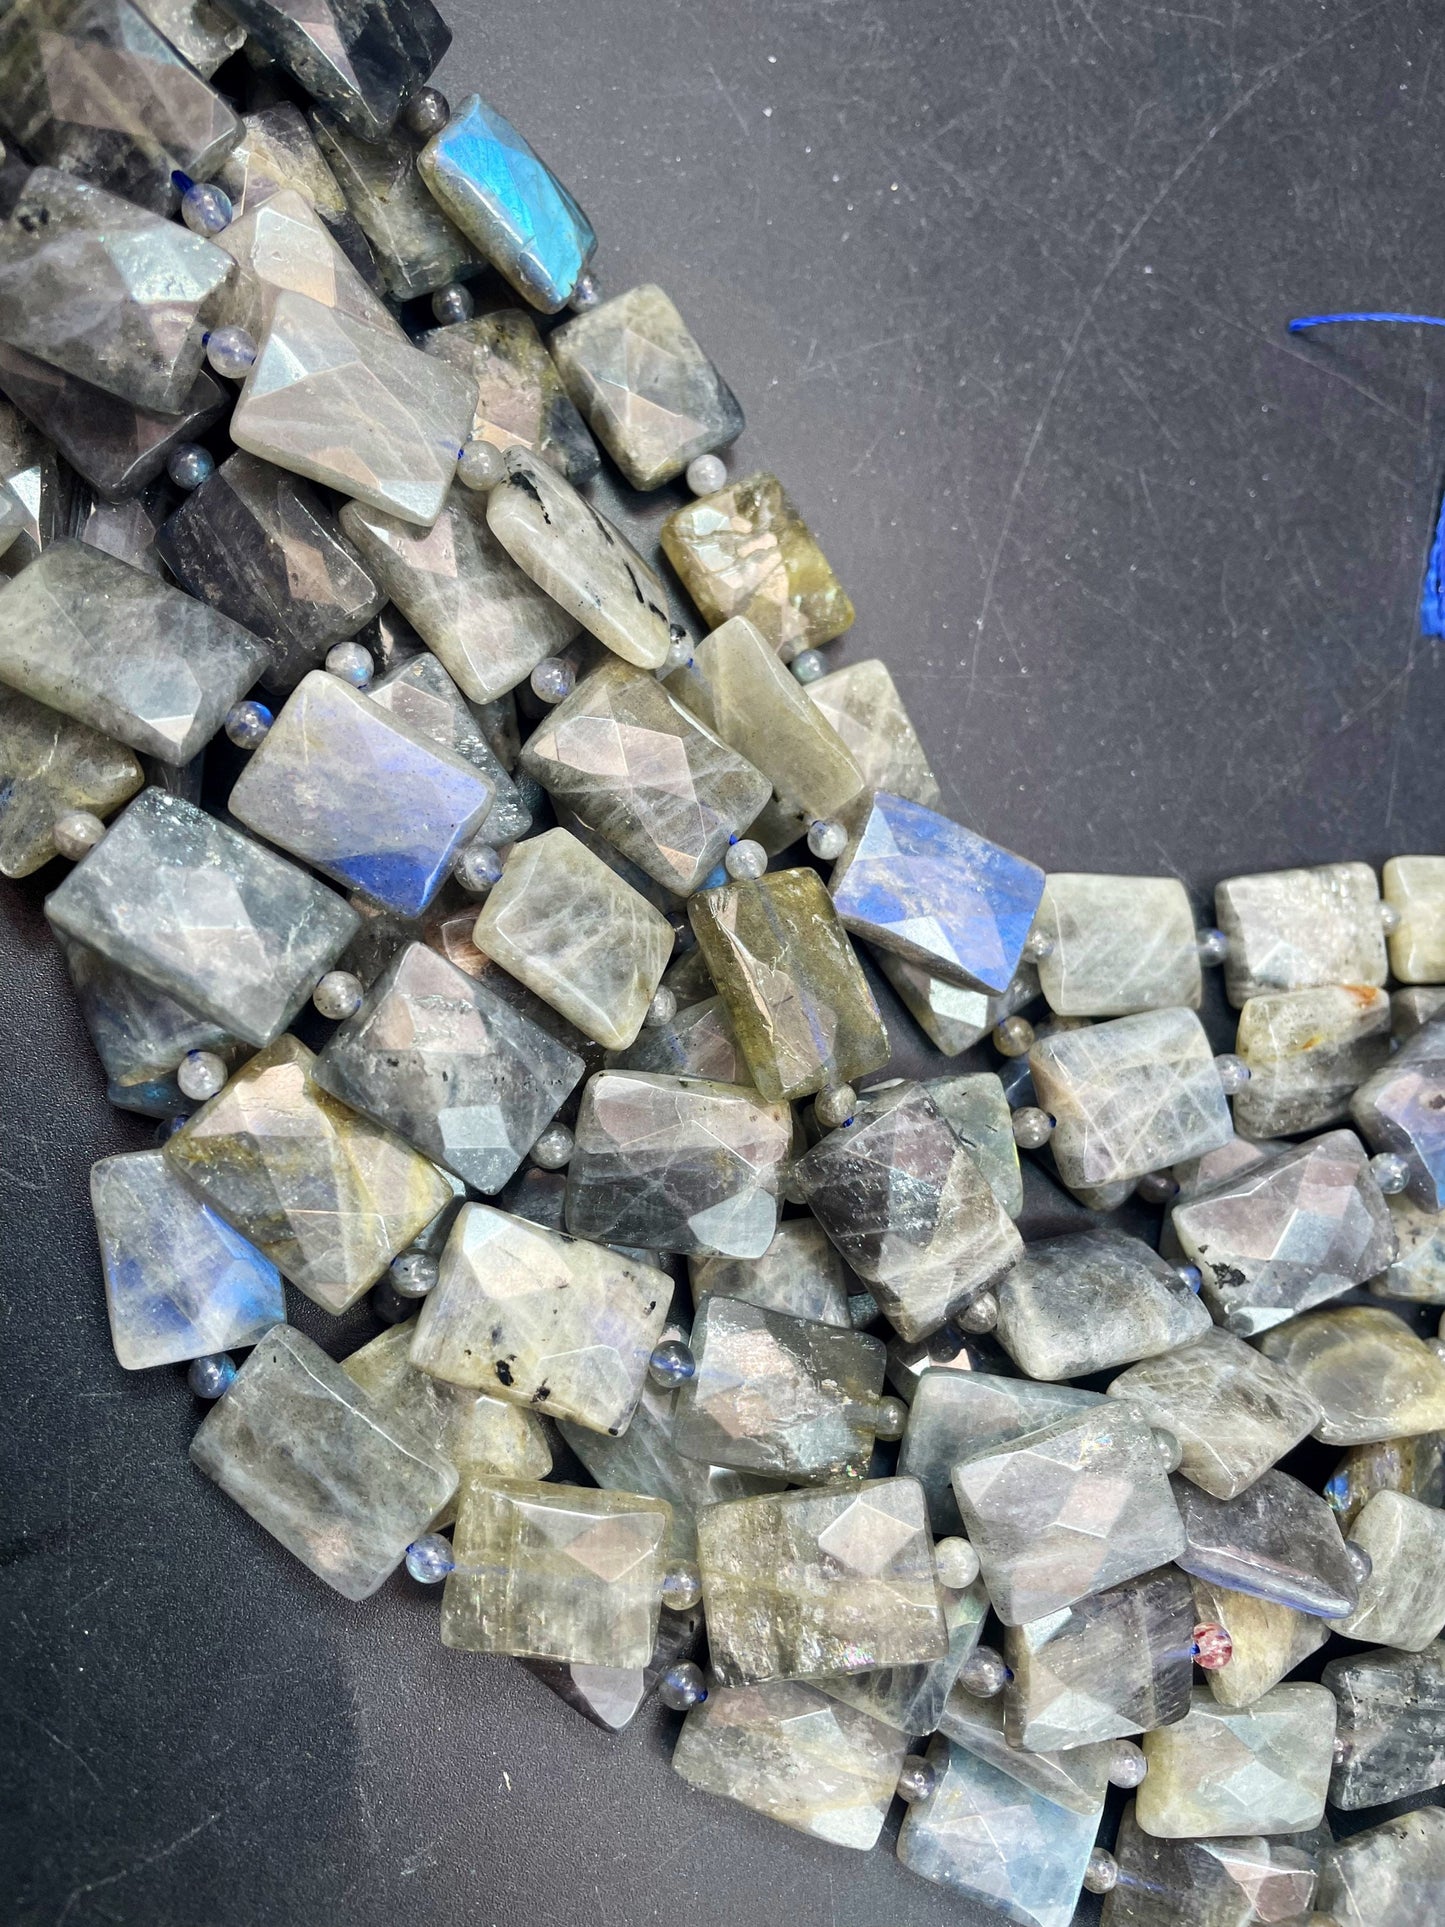 AAA Mystic Natural Labradorite Gemstone Bead Faceted 10x14mm, 12x18mm, 15x20mm Rectangle Shape, Gorgeous Natural Gray Blue Labradorite Gemstone Bead